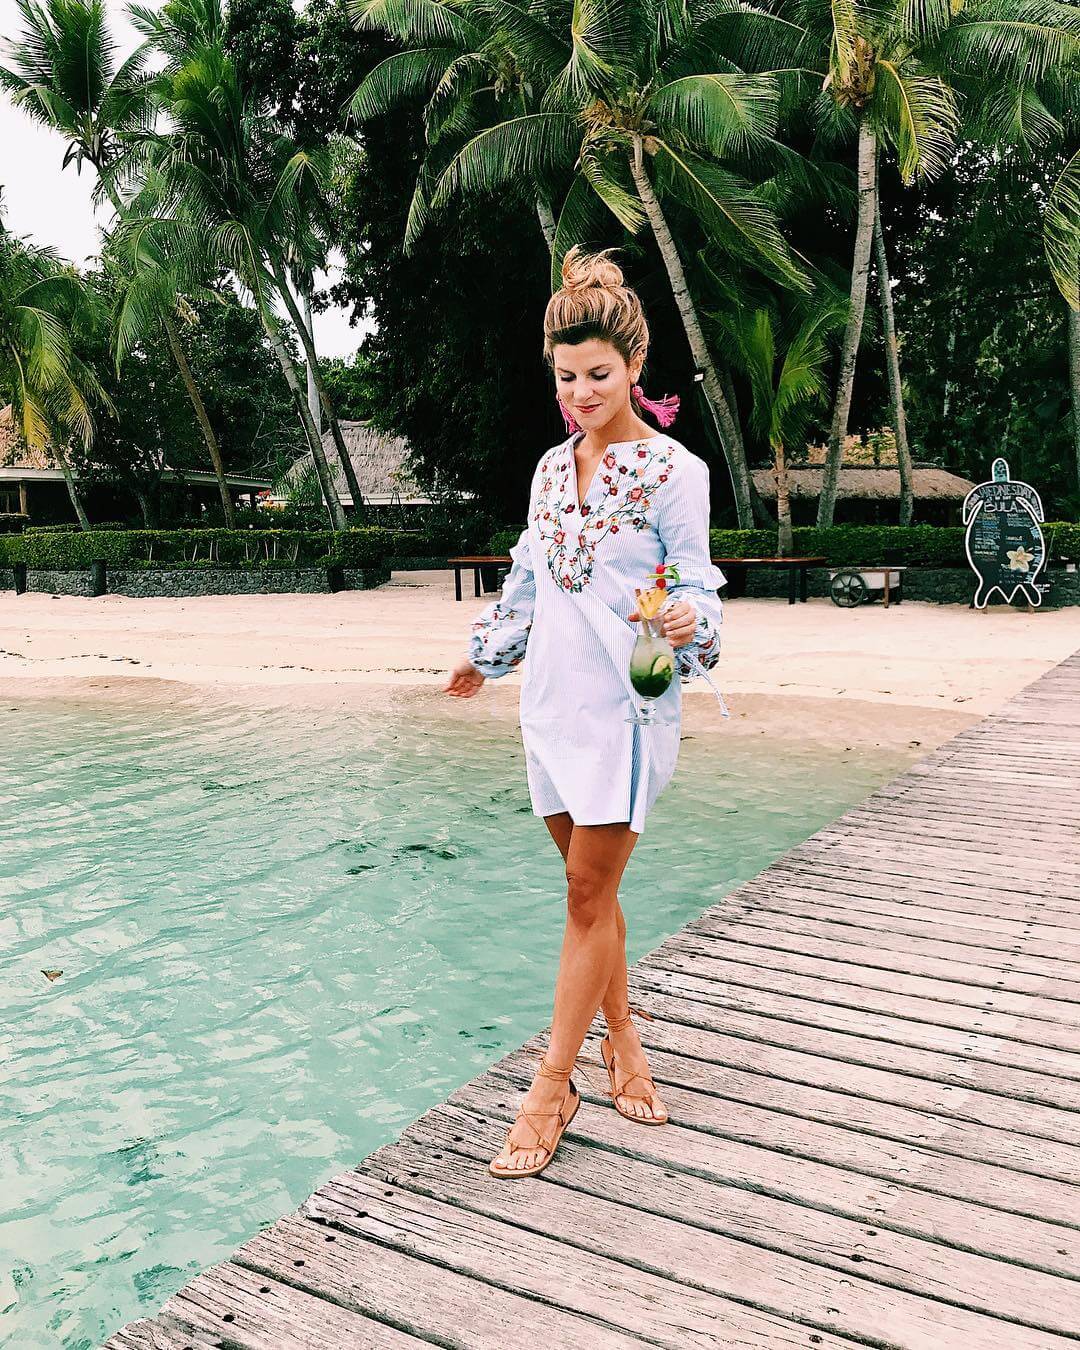 brighton keller on the boardwalk wearing embroidered dress, lace up sandals, and tassel drop earrings